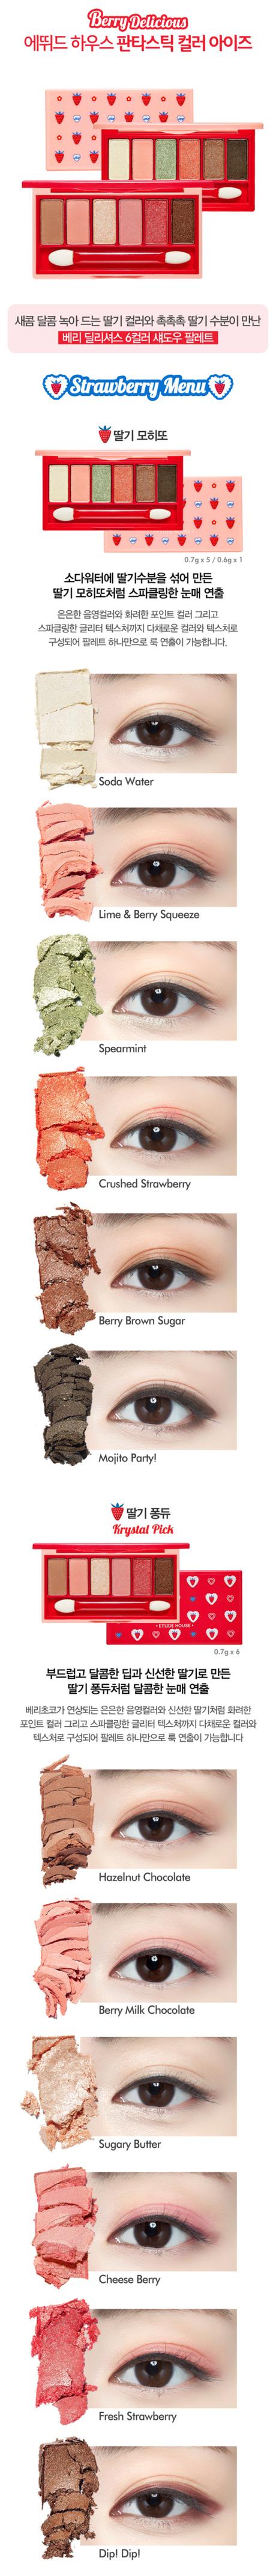 etude house berry-delicious-fantastic-color-eyes combined